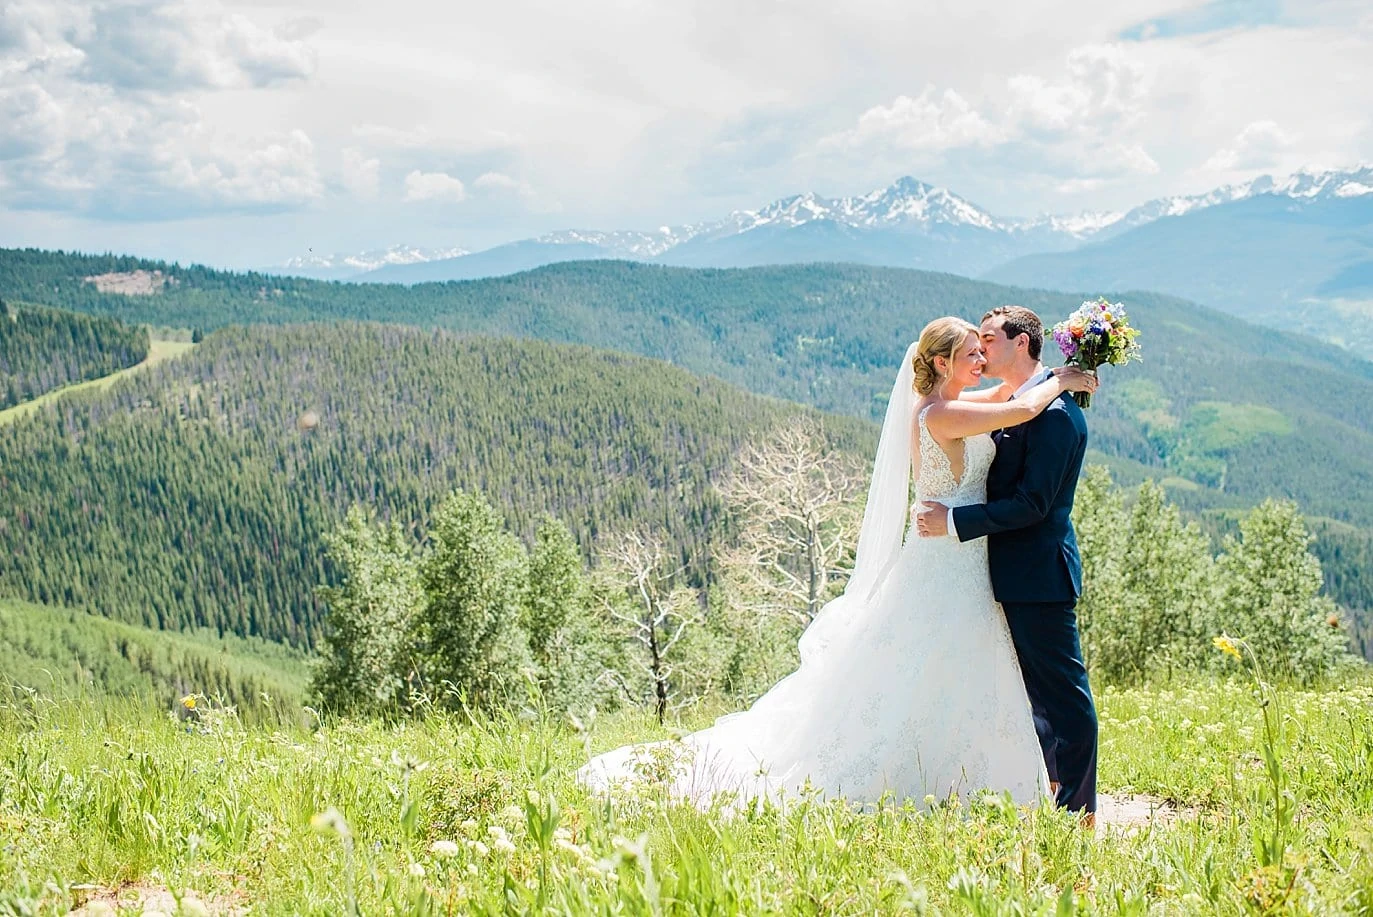 Vail Mountain wedding day photo by Vail wedding photographer Jennie Crate